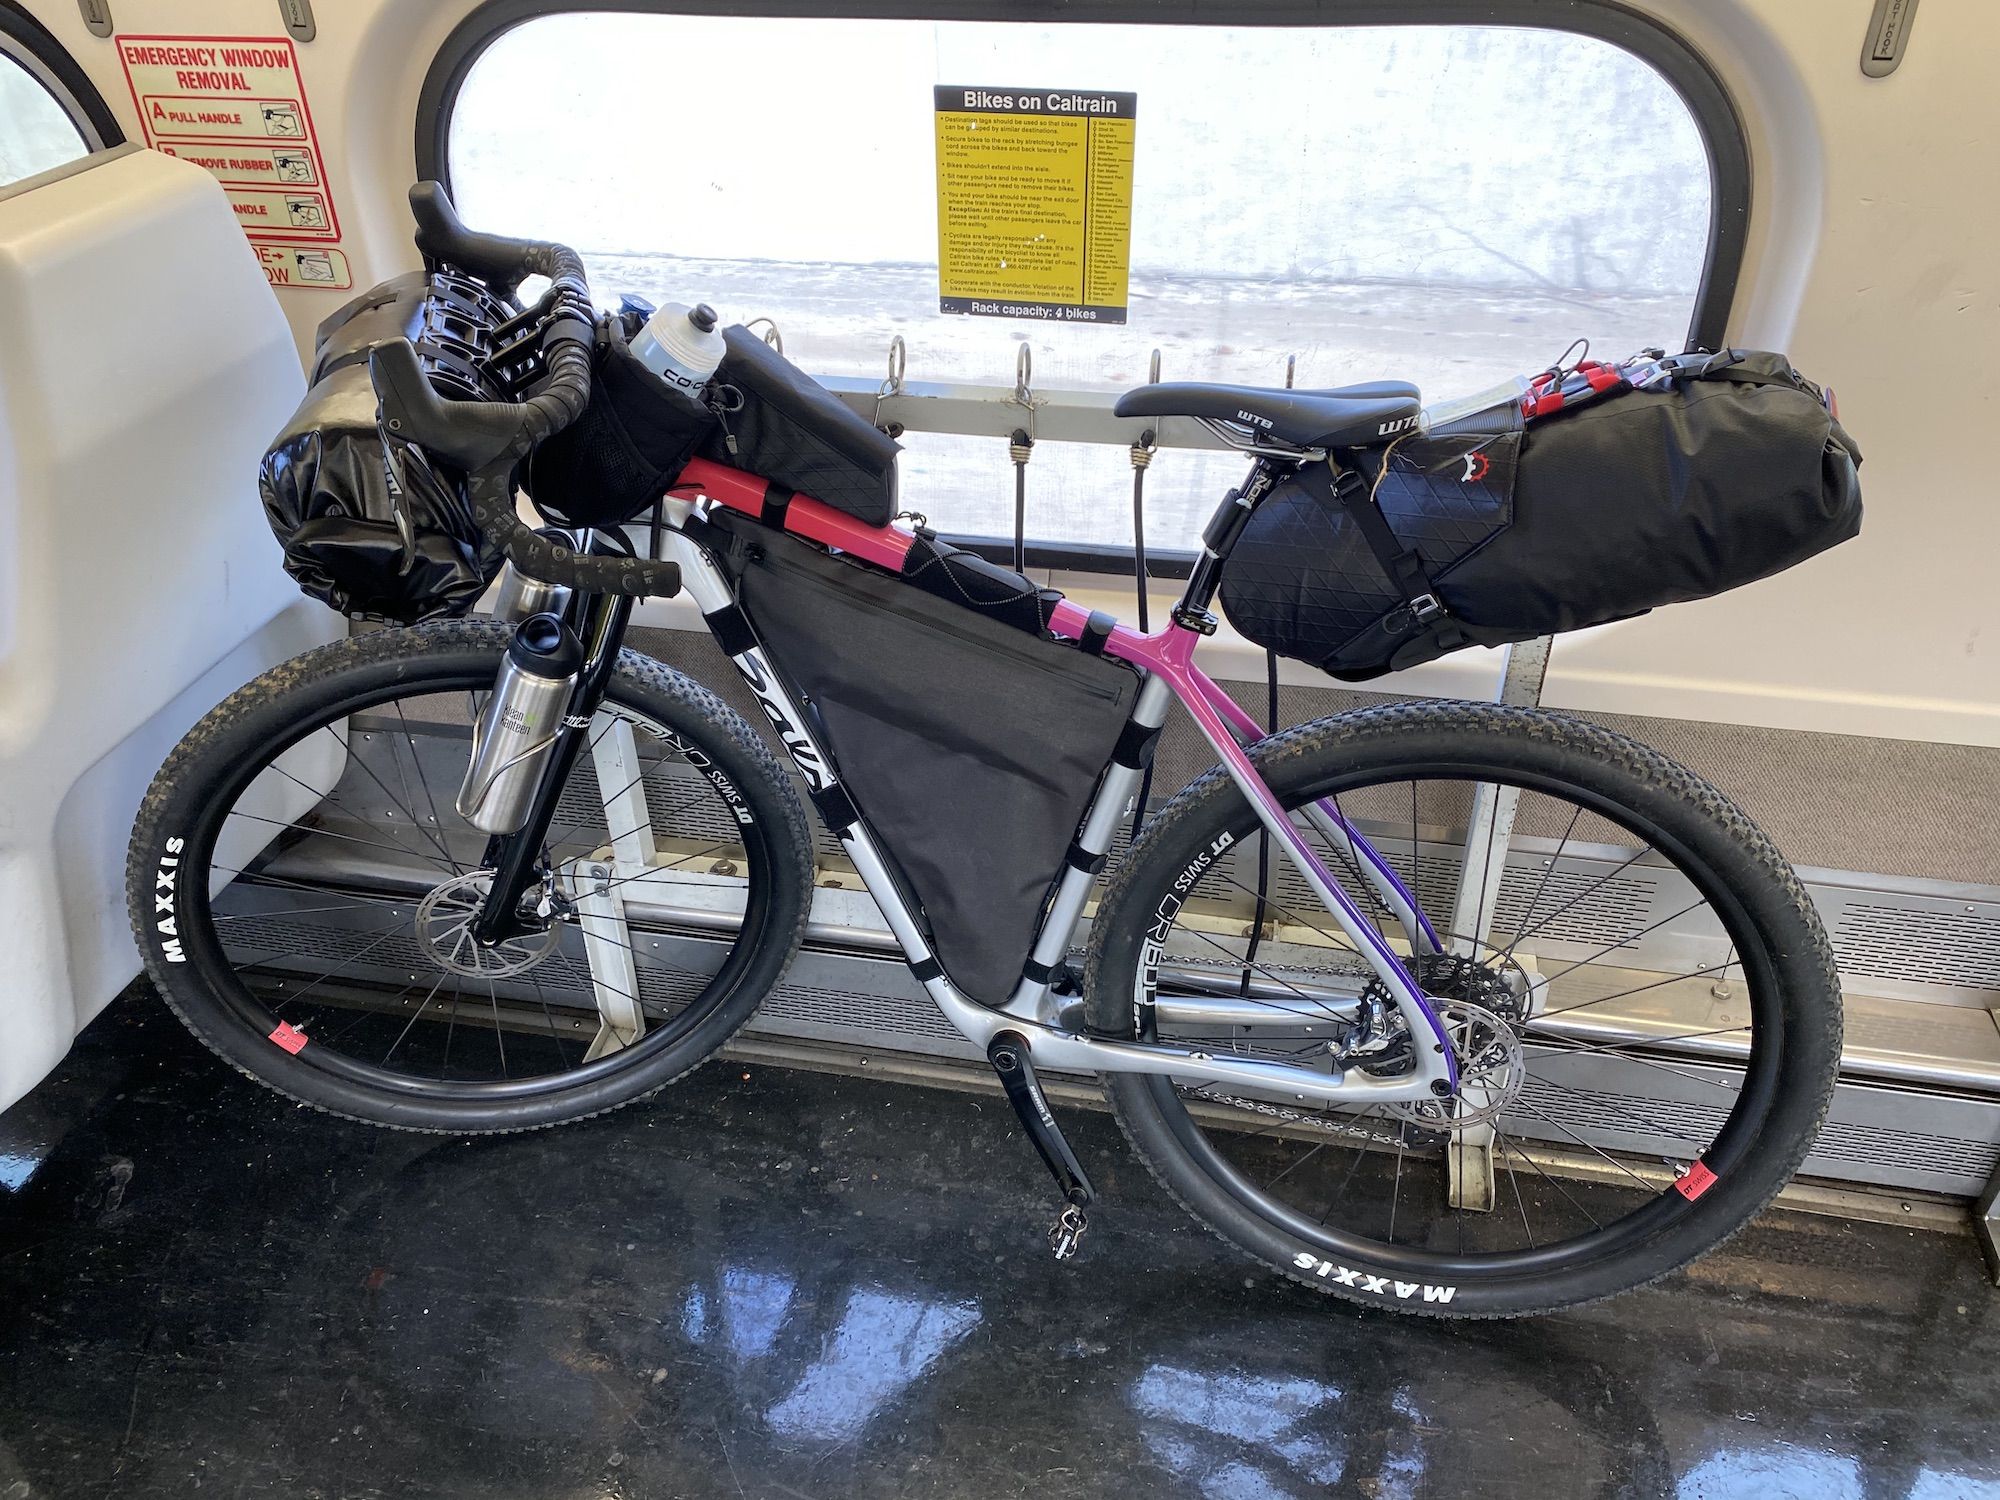 A bike with bikepacking bags loaded onto a train. Caltrain is a good option to get to the start of your trip in the Bay Area.